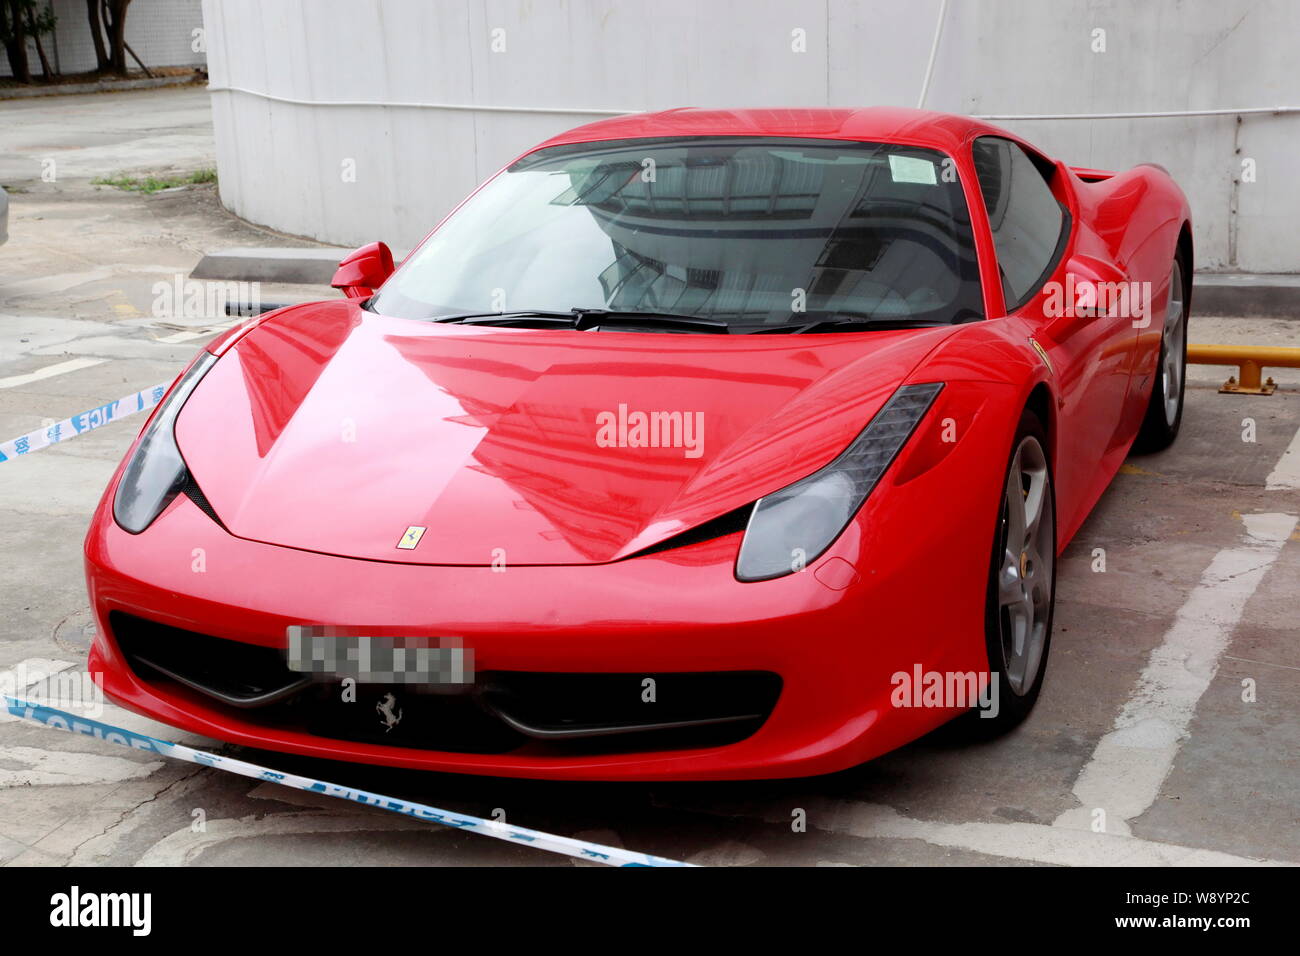 A Luxury Ferrari 458 Italia Sports Car From Hong Kong Which Is Detained Alongside Its Driver By Local Police For Speeding And Drag Racing On An Expres Stock Photo Alamy